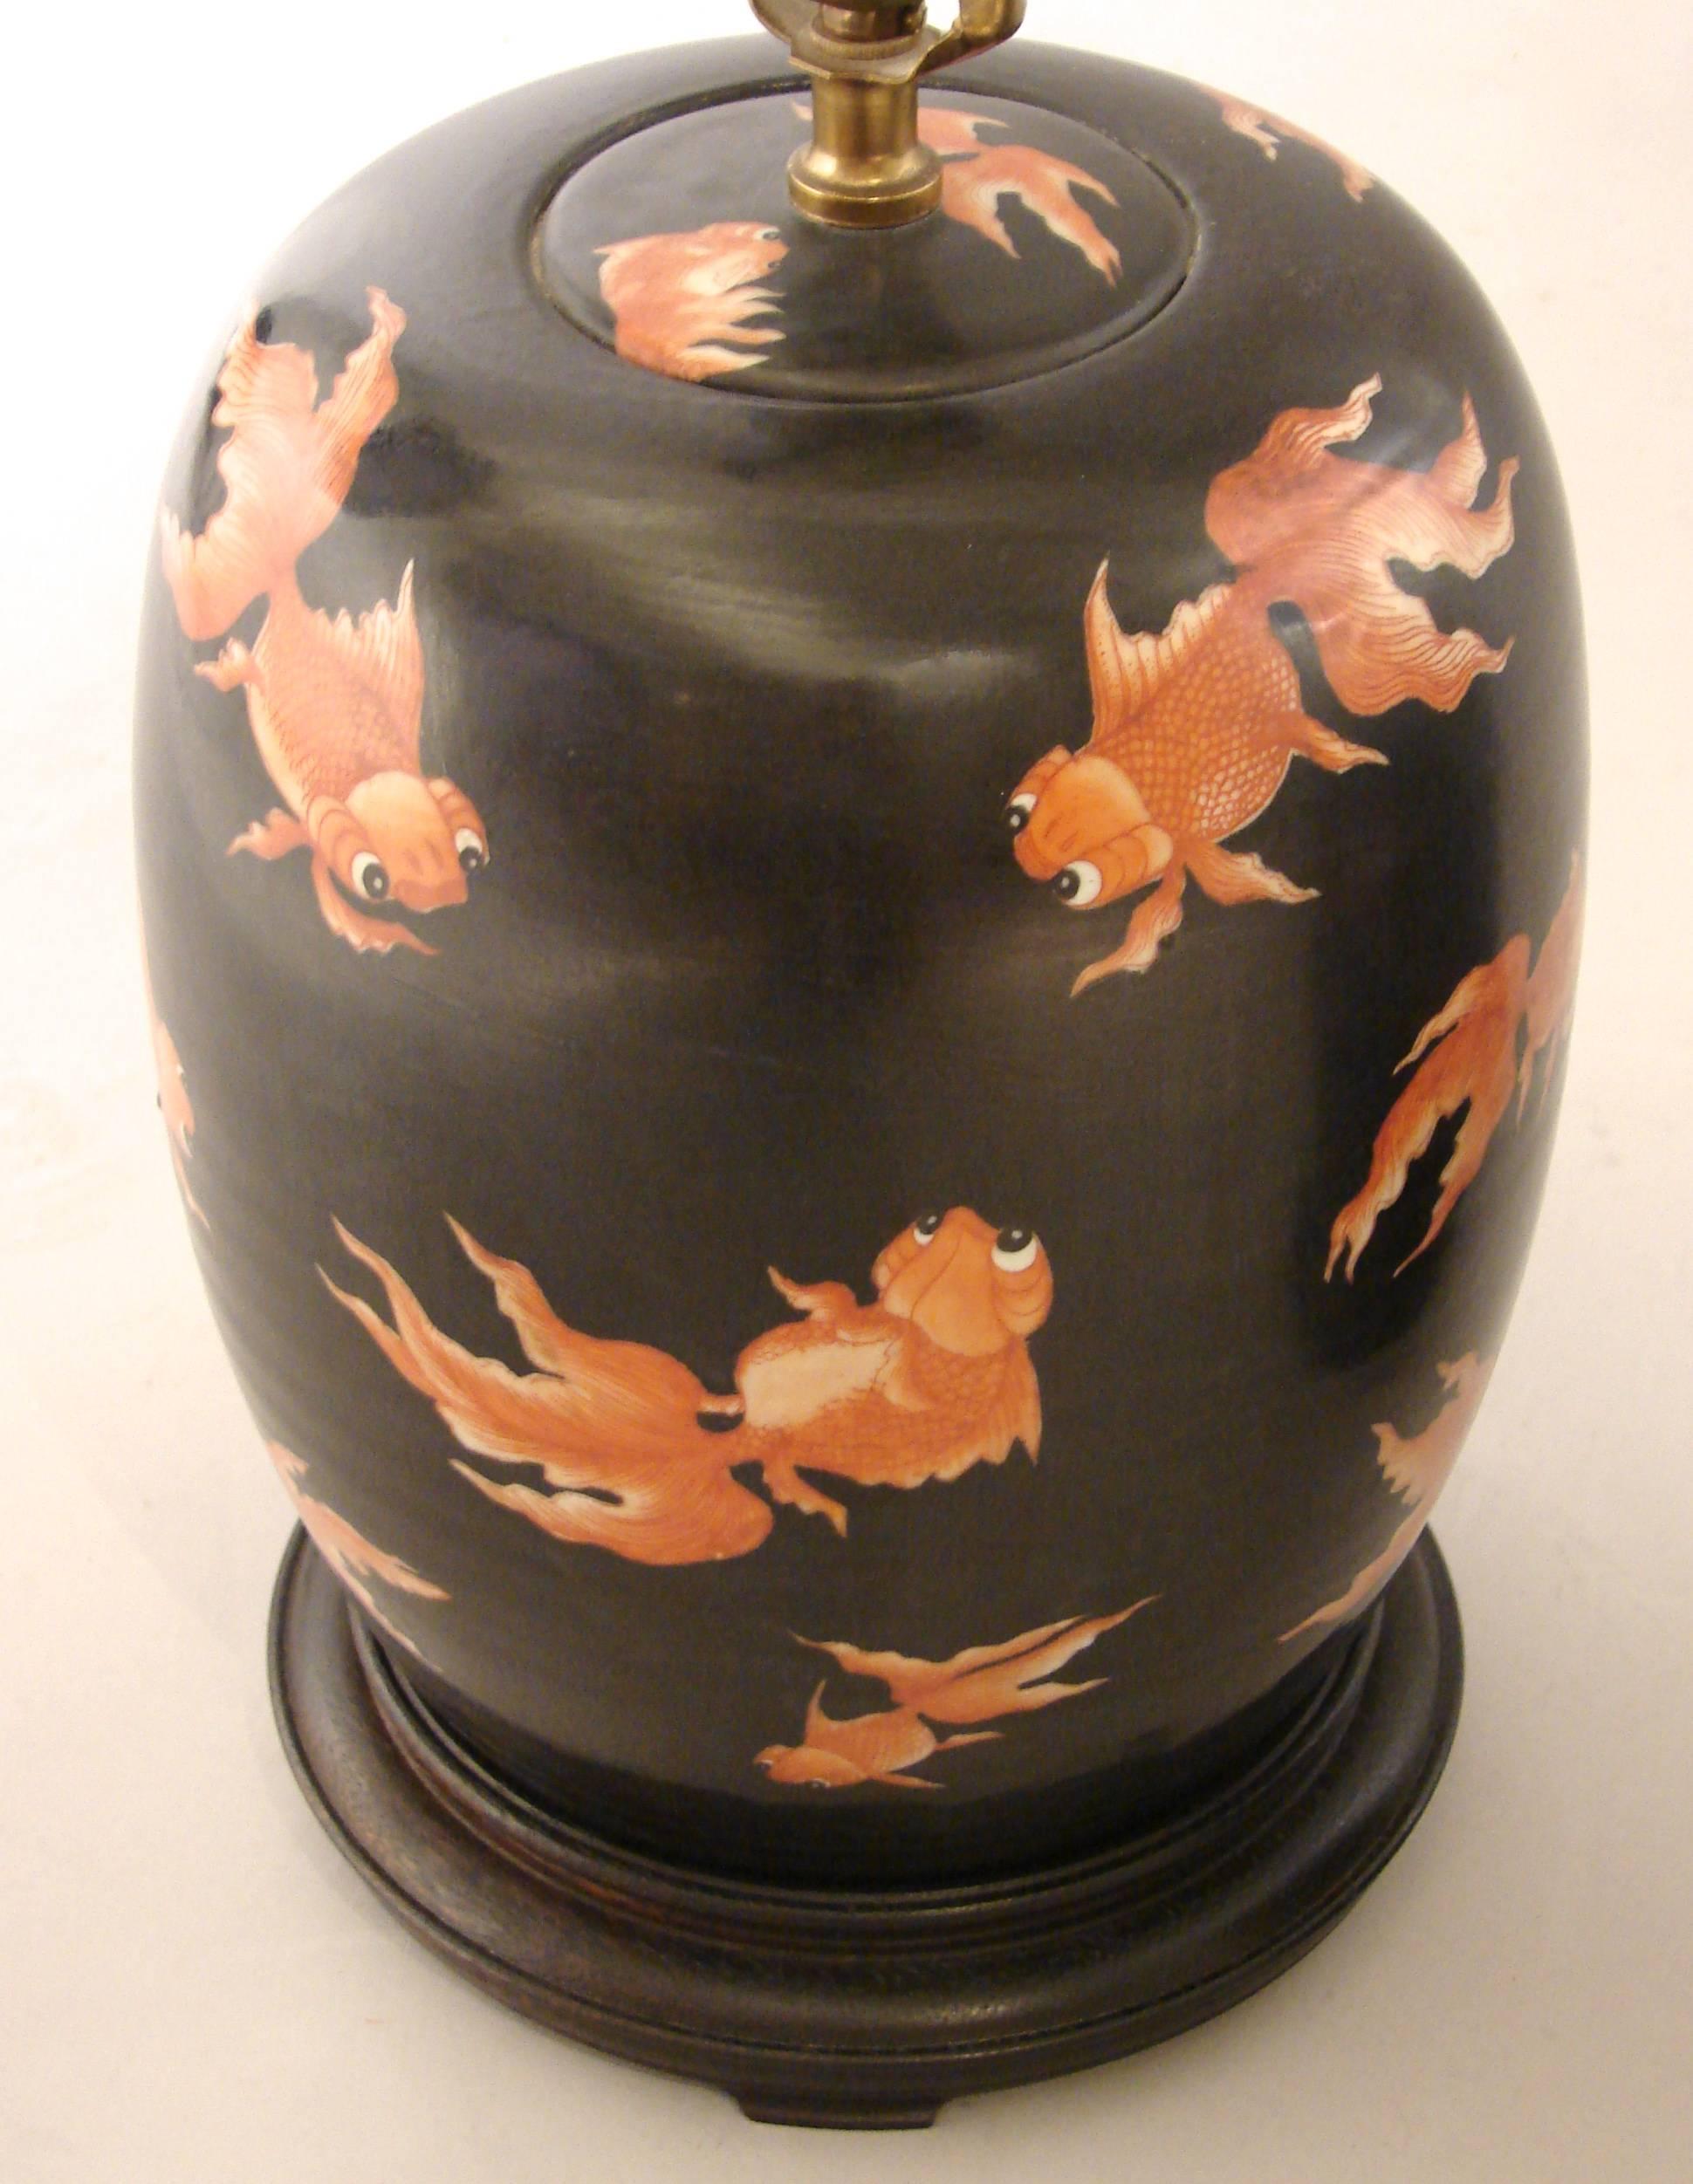 A decorative pair of black and orange goldfish decorated earthenware ginger jars with lids, now electrified and resting on carved wood bases. 20th century.